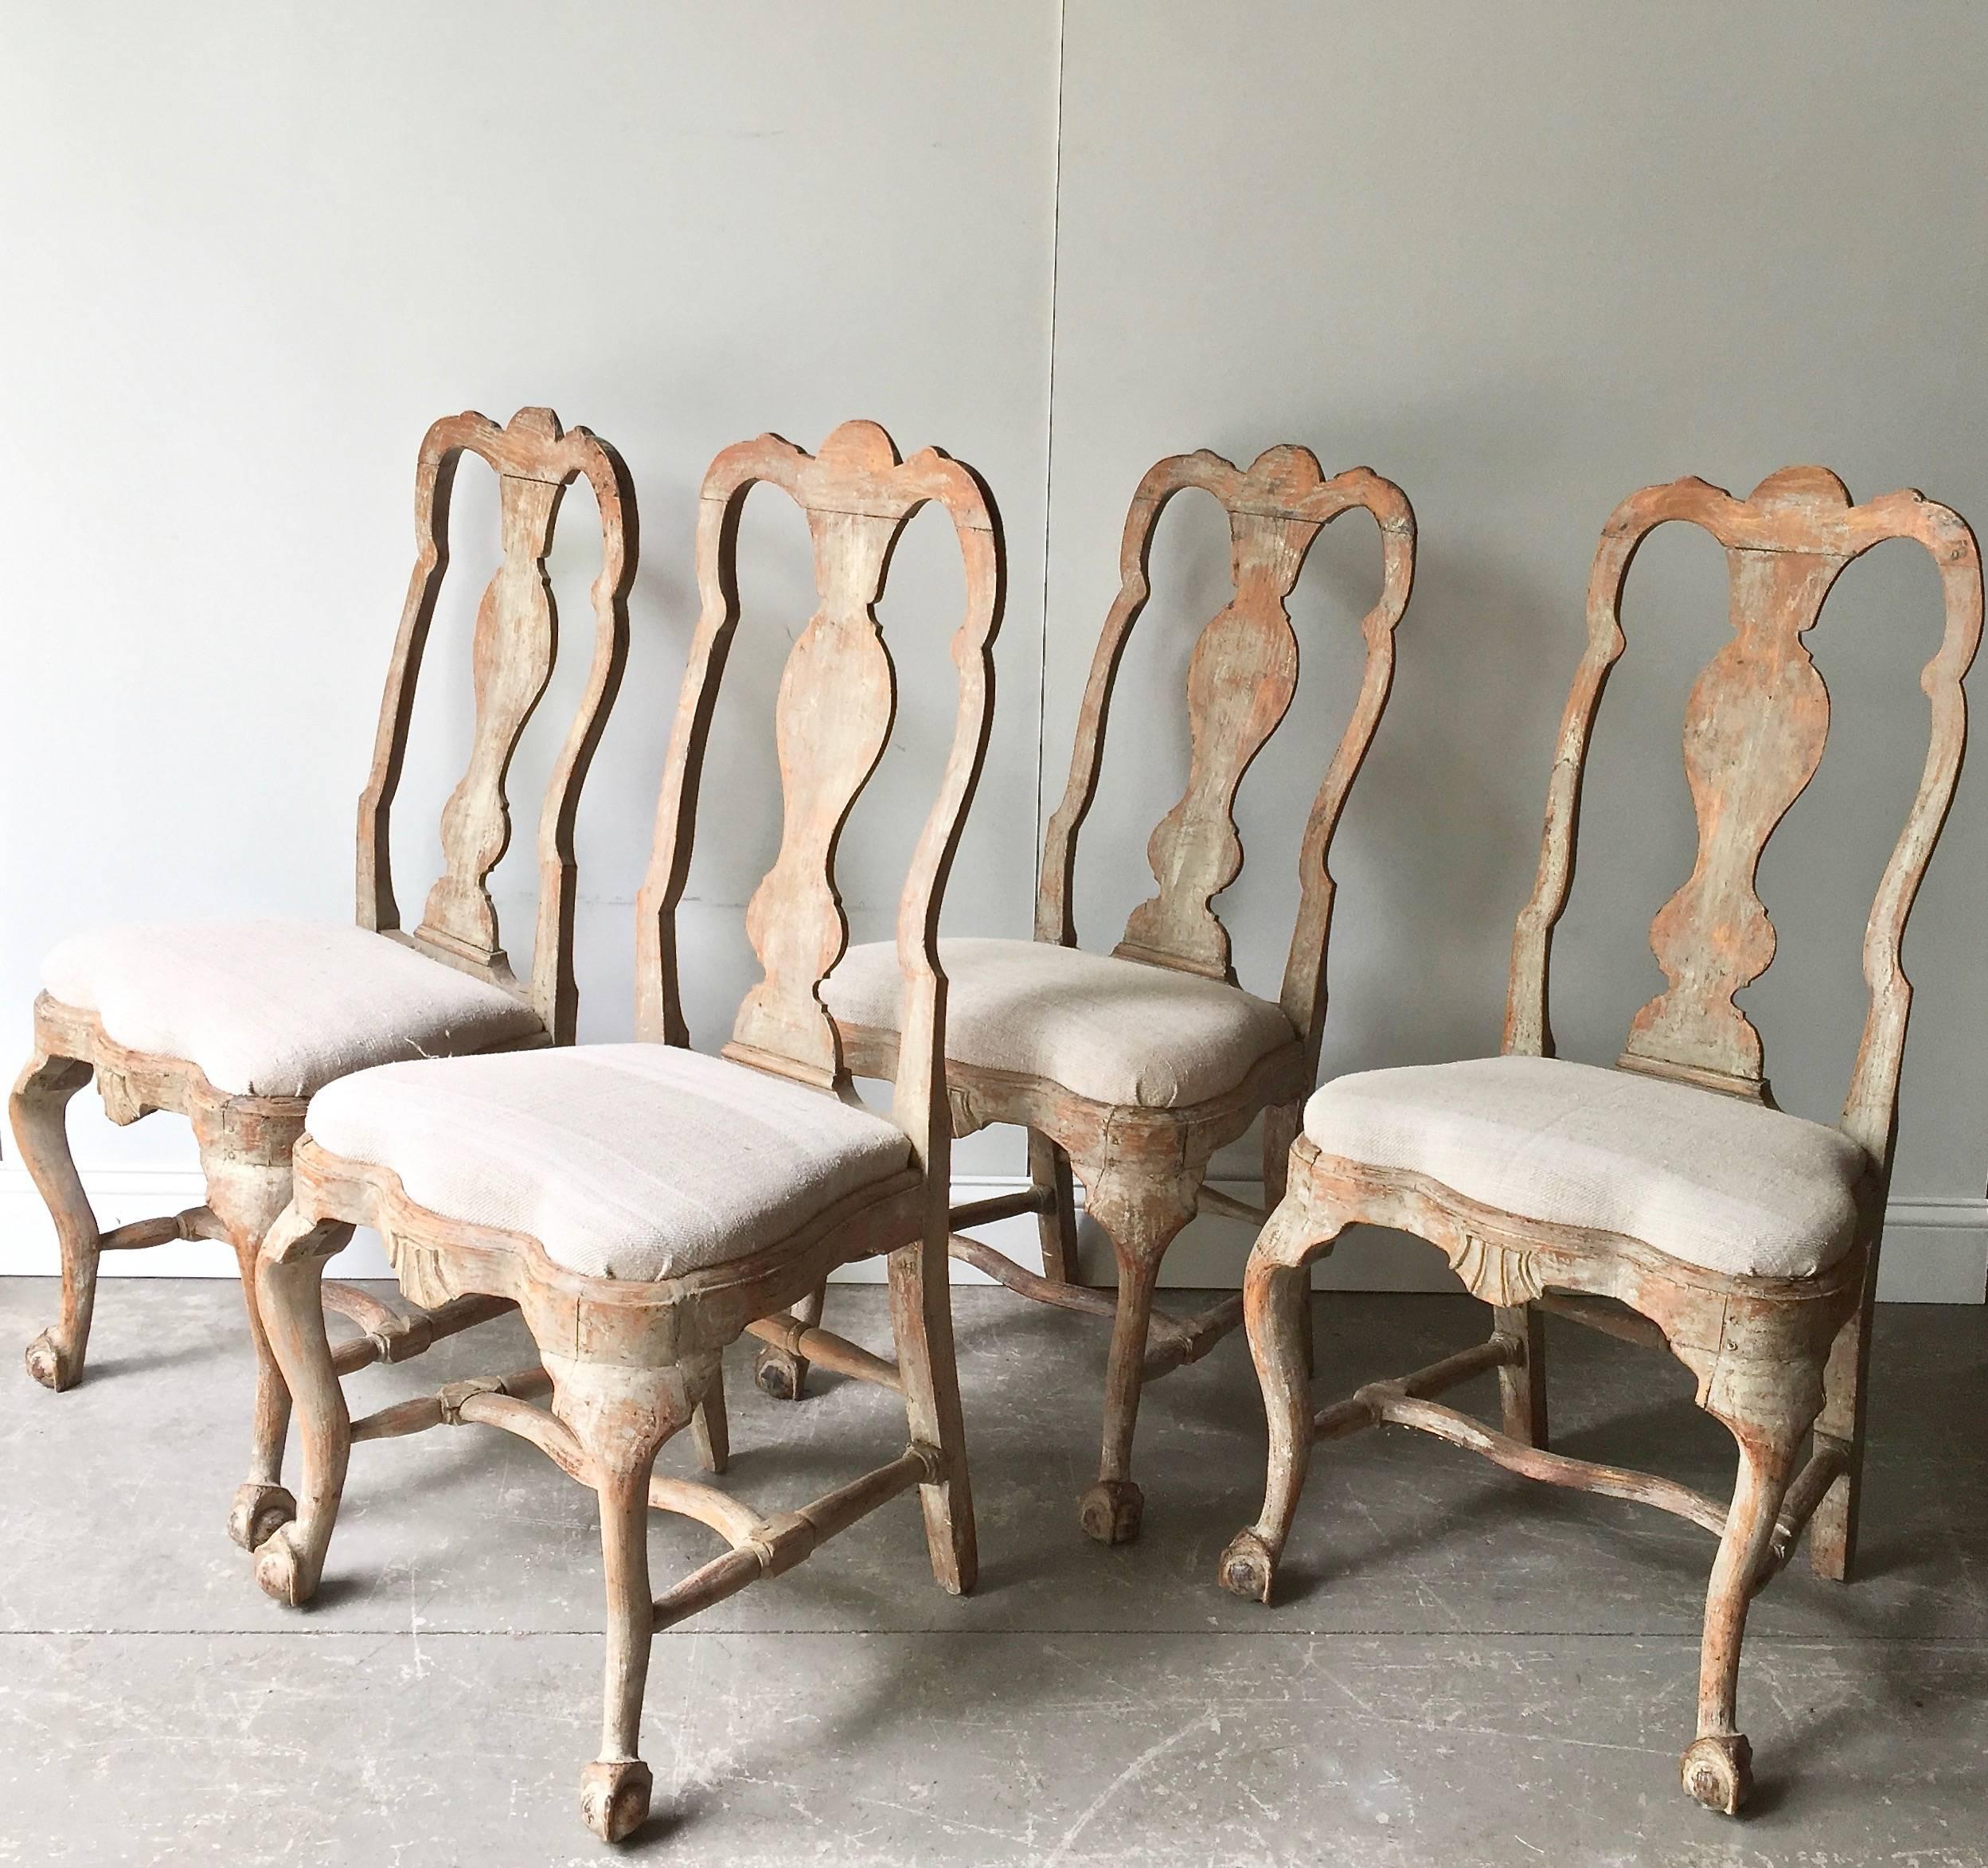 
Set of four elecant18th century Swedish chairs in Rococo period, circa 1760. Lovengly handmade with ritchly carved. Hand scraped back to traces of their original worn paint. Upholstered with antique raw linen. Very elegant chairs, look fantastic